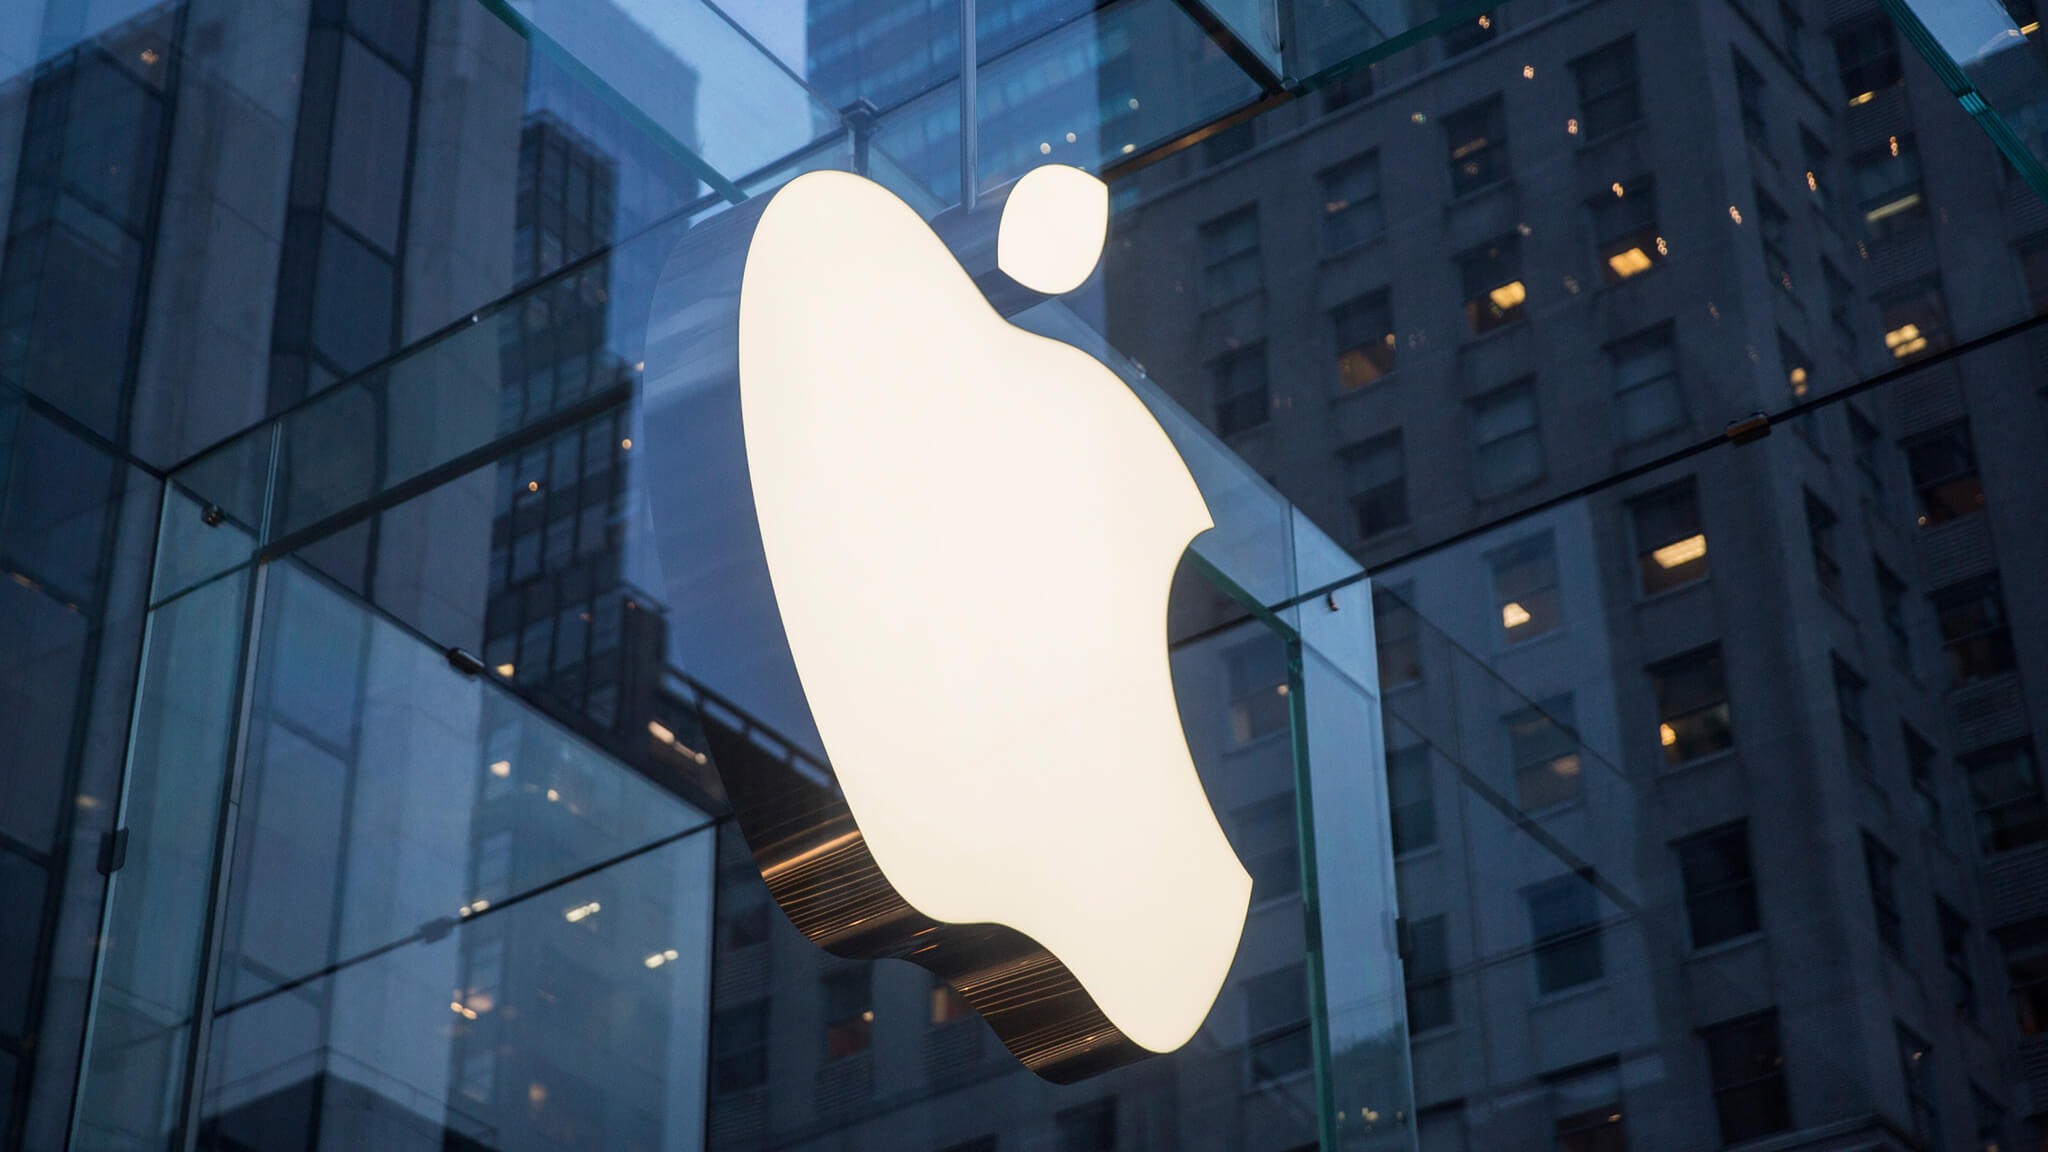 Teenager says he hacked Apple hoping it would hire him